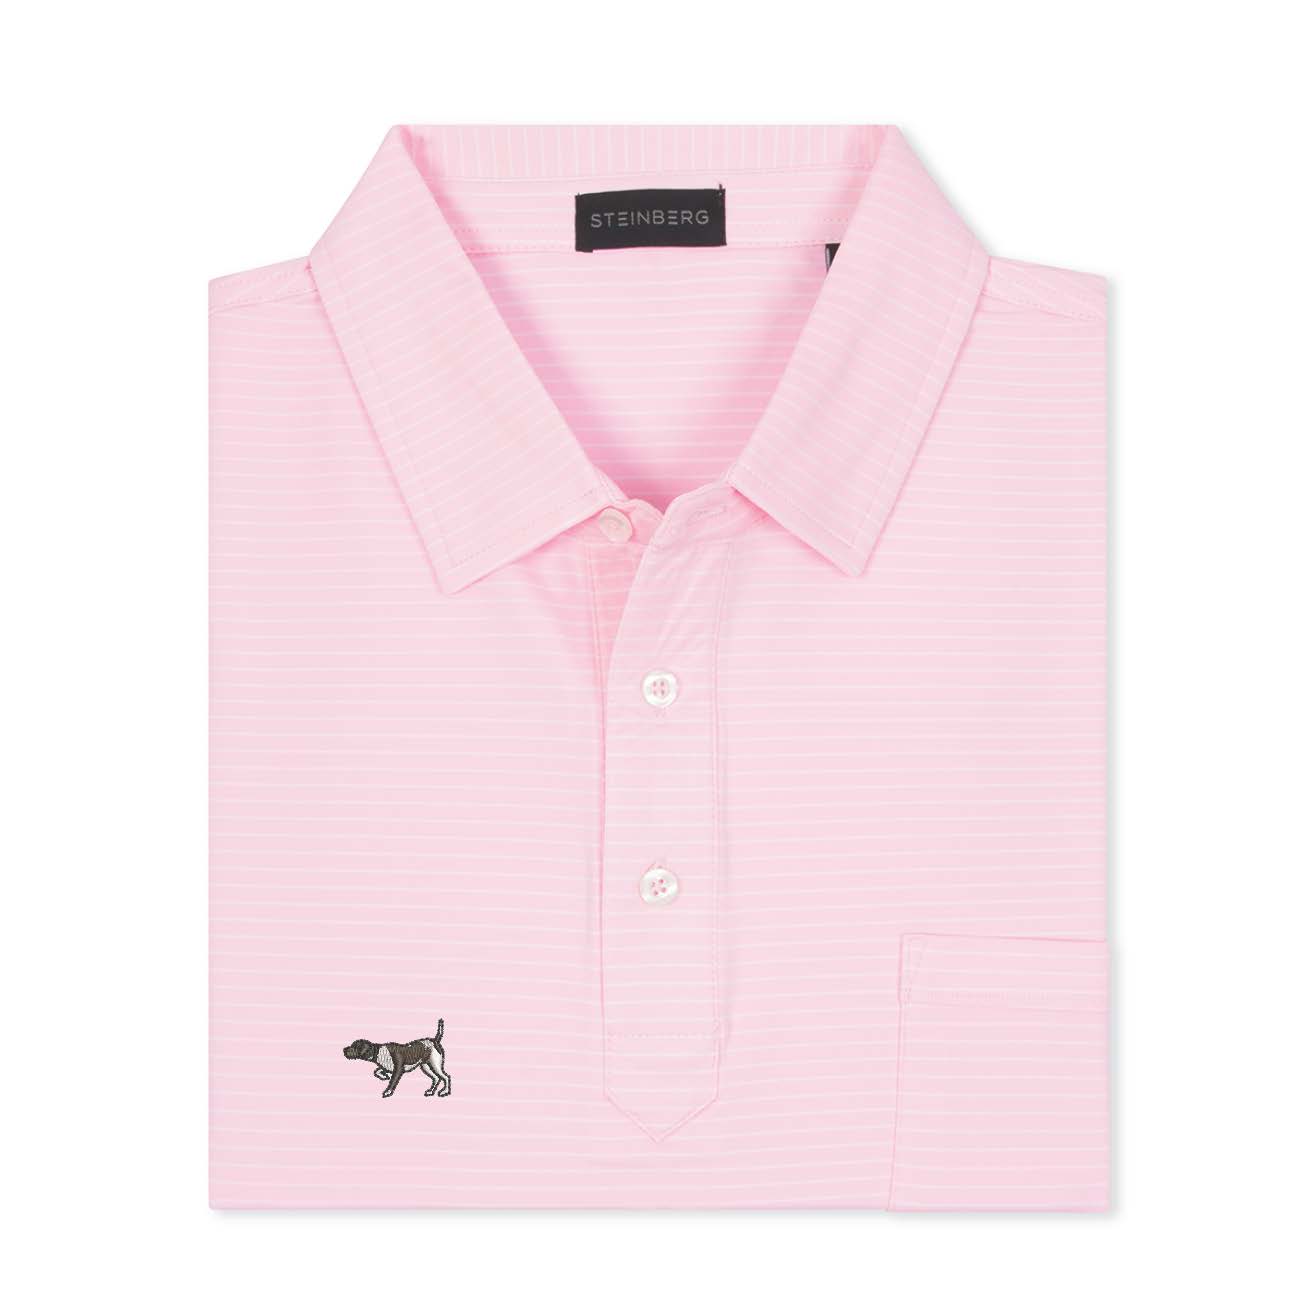 The Loft Performance Polo Pointer Collection